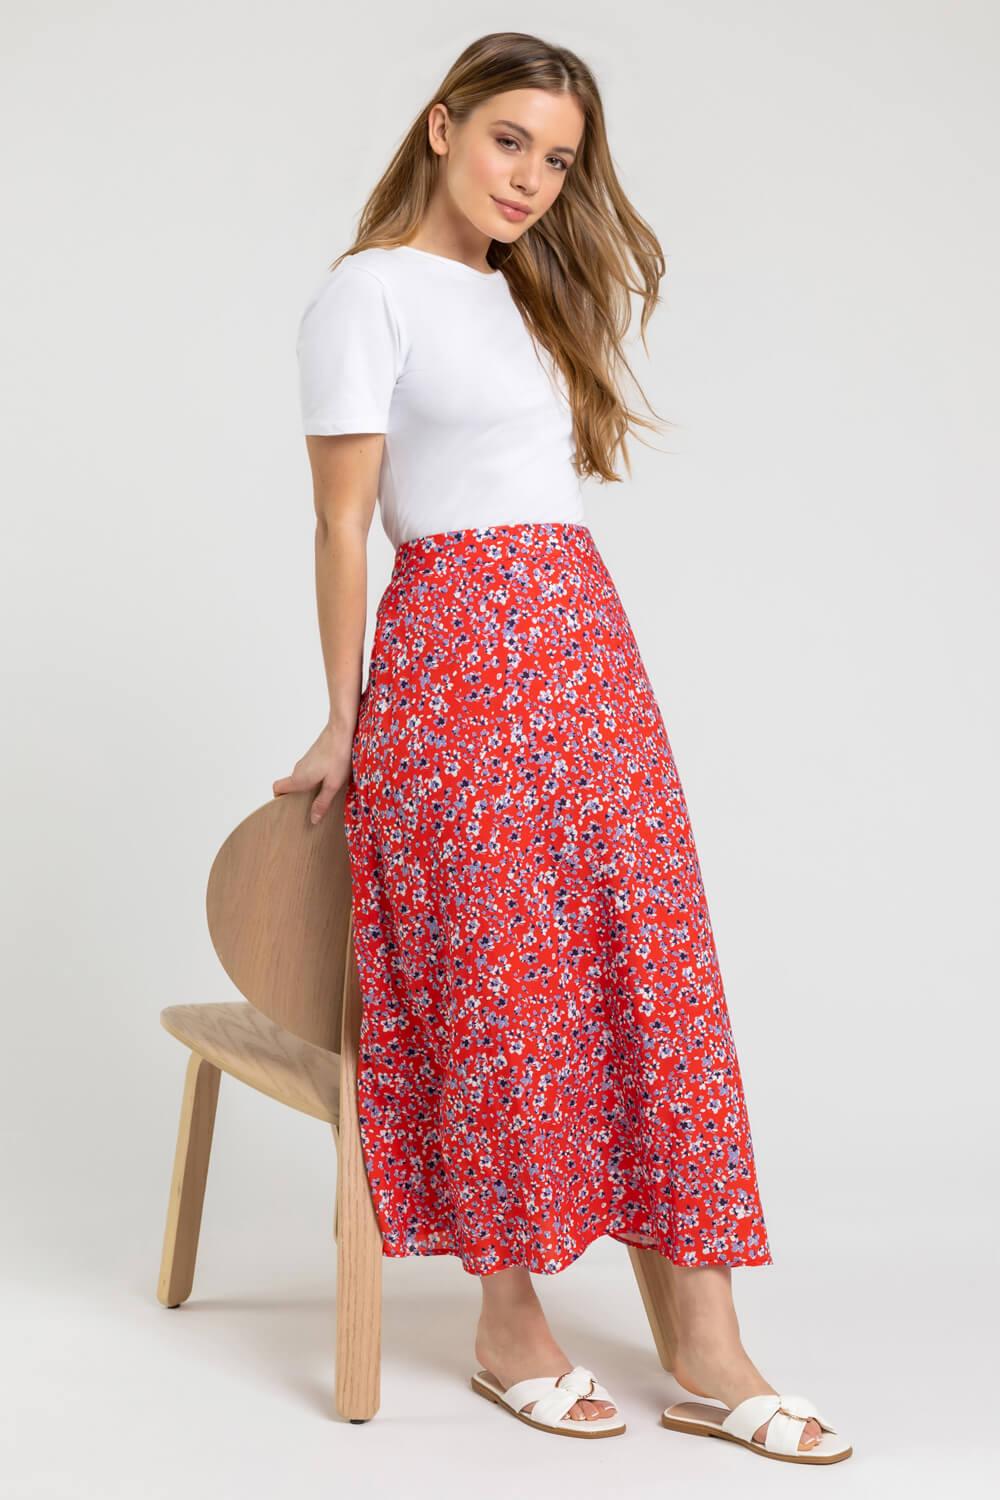 Petite Ditsy Floral A-Line Skirt